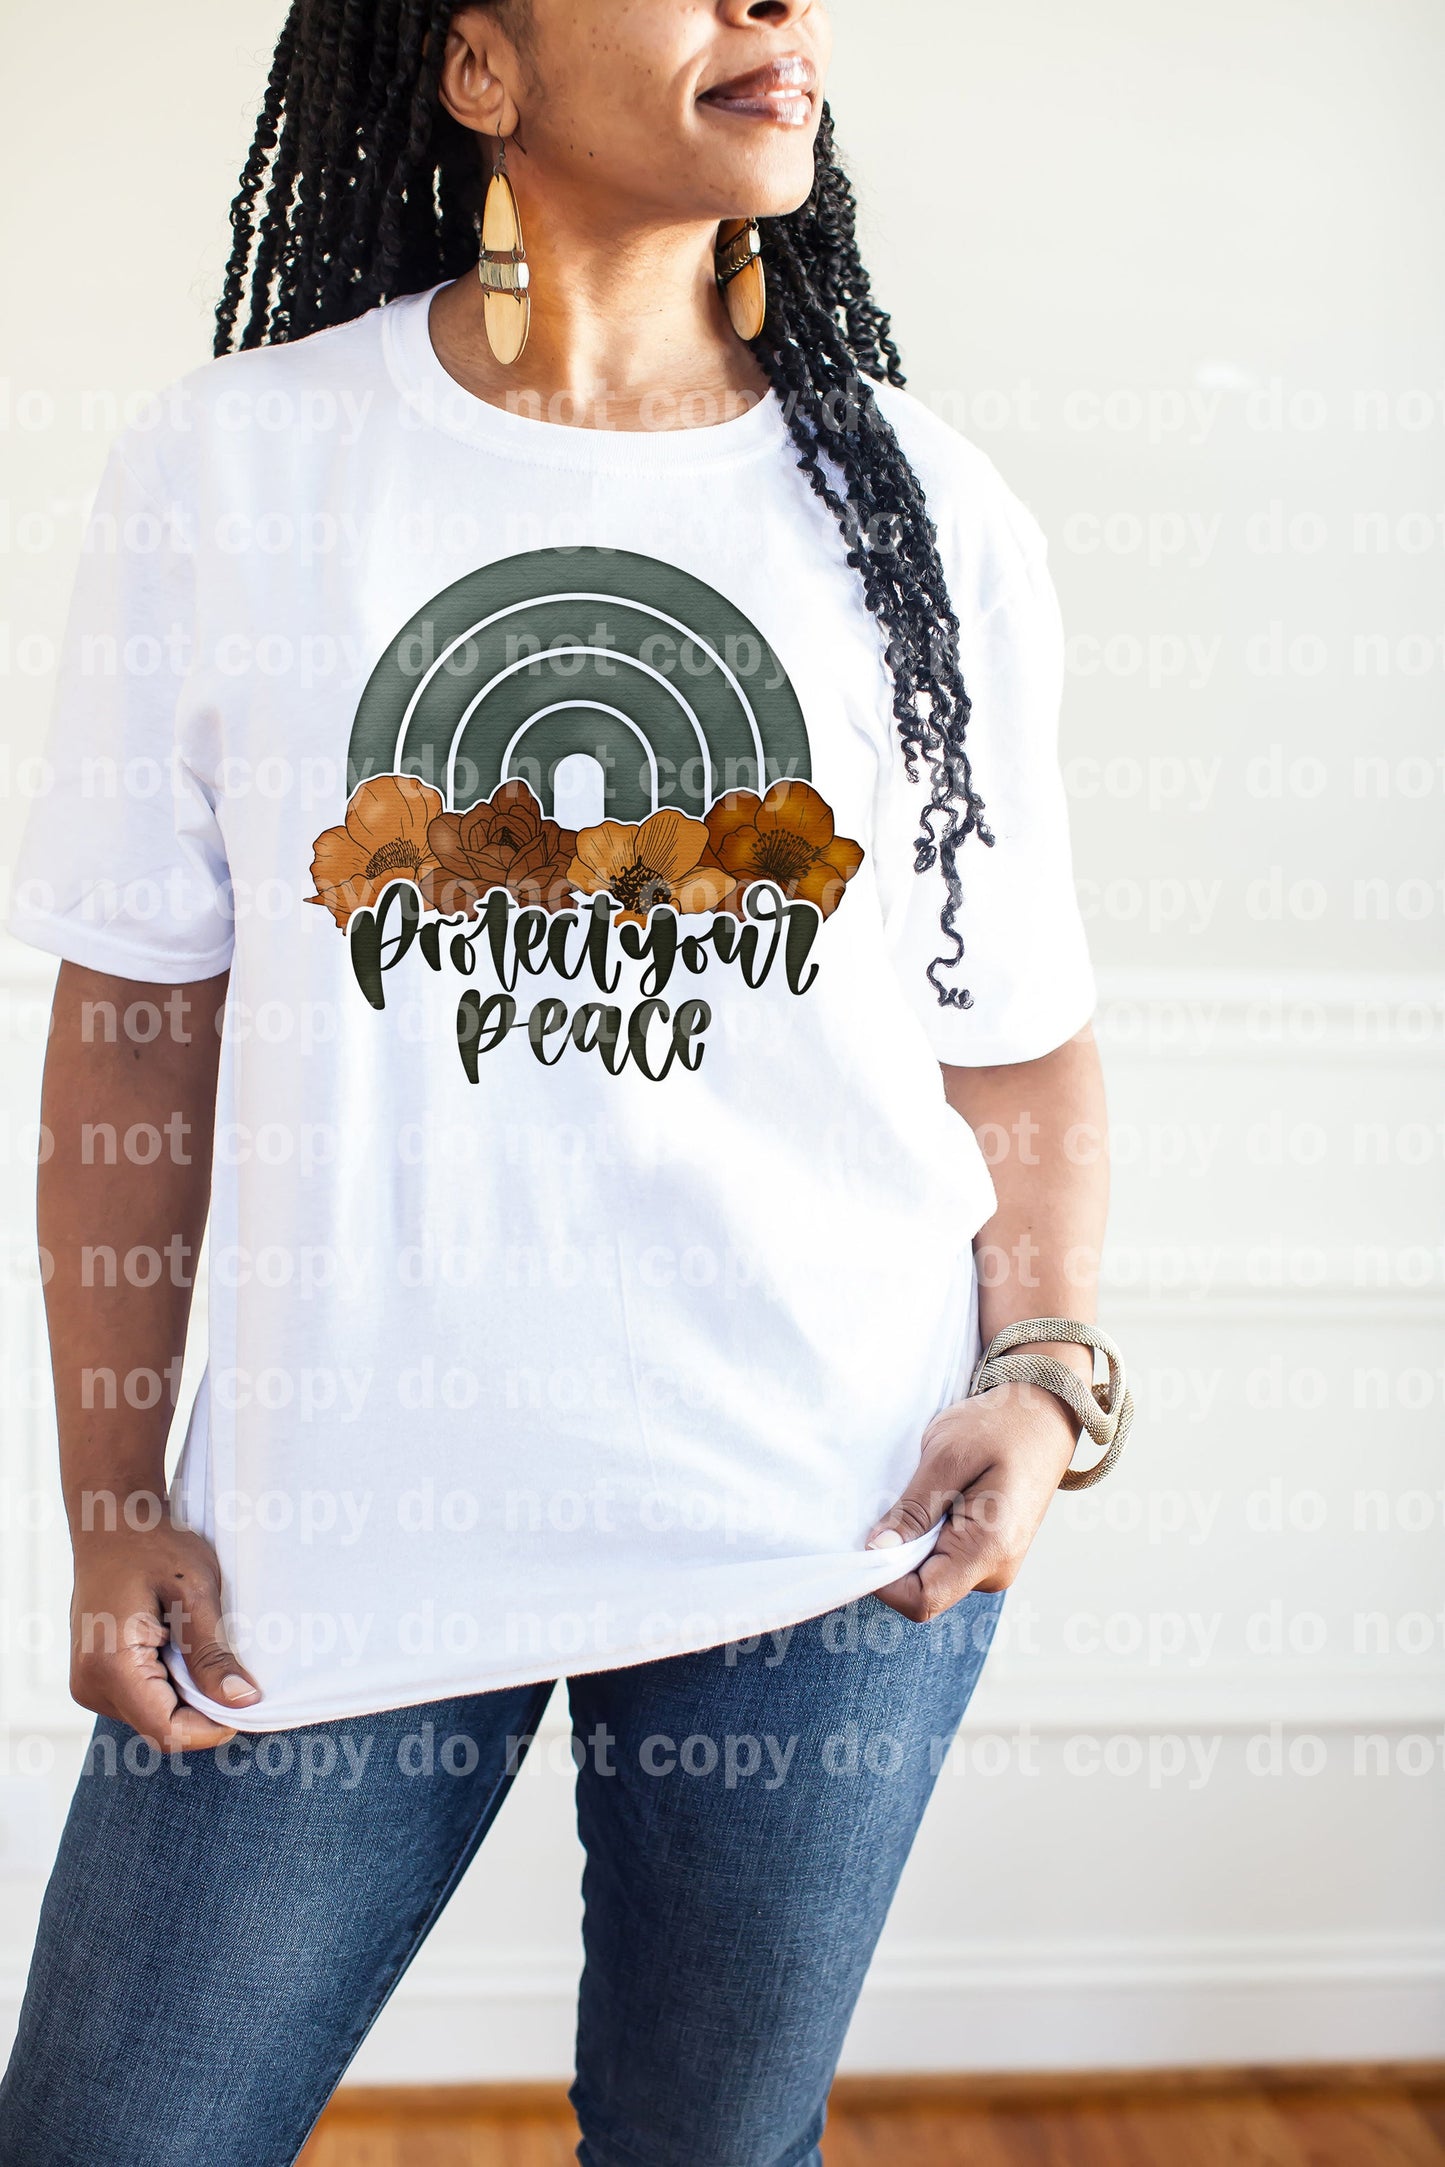 Protect Your Peace Dream Print or Sublimation Print